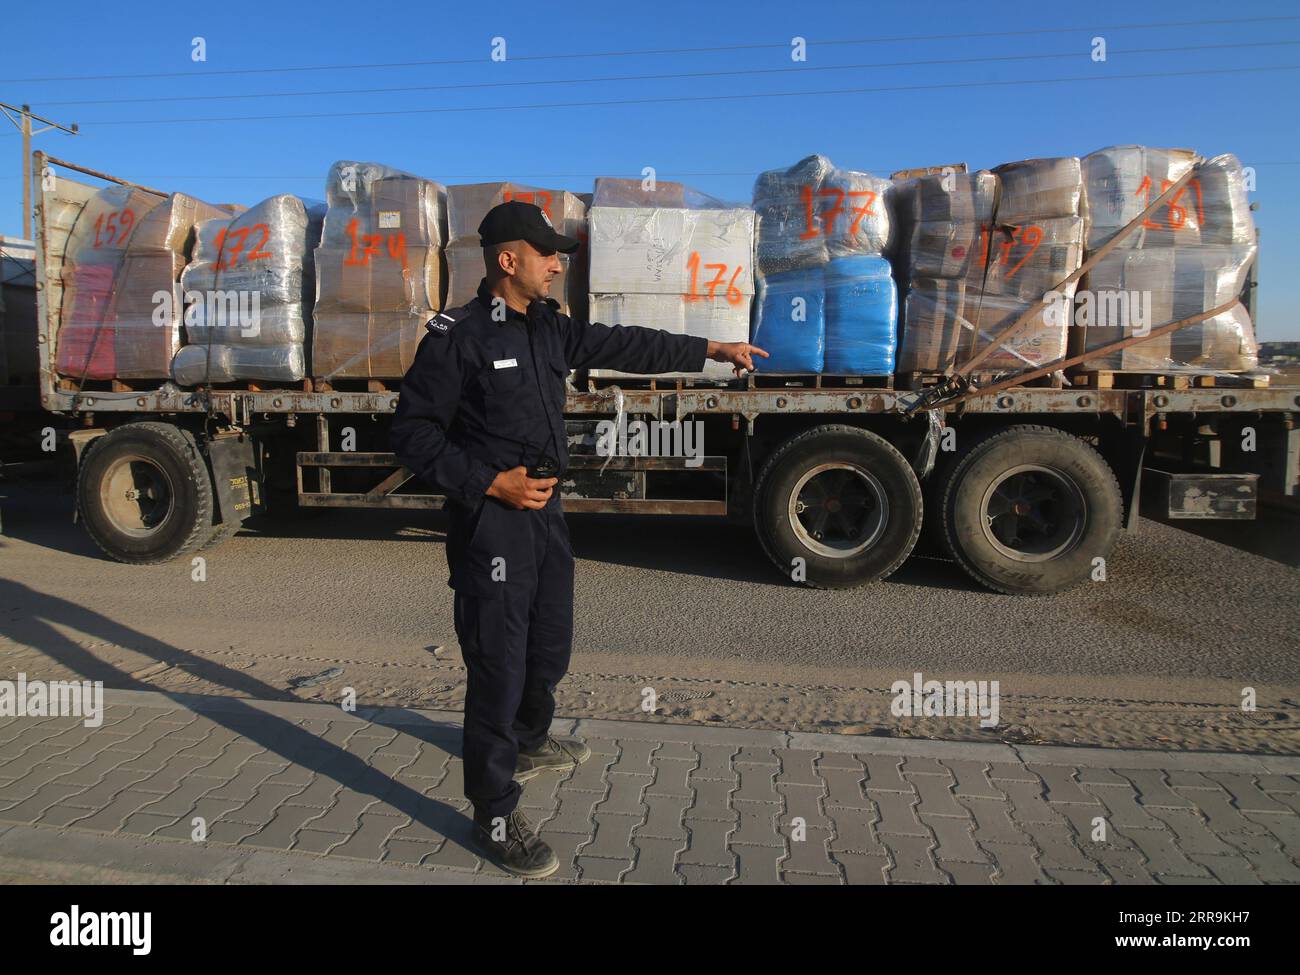 210621 -- RAFAH, June 21, 2021 -- A Palestinian police officer gestures as a truck loaded with clothes for export passes through the Kerem Shalom Crossing in the southern Gaza Strip city of Rafah, on June 21, 2021. Israel on Monday eased some restrictions imposed on the Gaza Strip crossings. Photo by /Xinhua MIDEAST-GAZA-RAFAH-KEREM SHALOM CROSSING KhaledxOmar PUBLICATIONxNOTxINxCHN Stock Photo